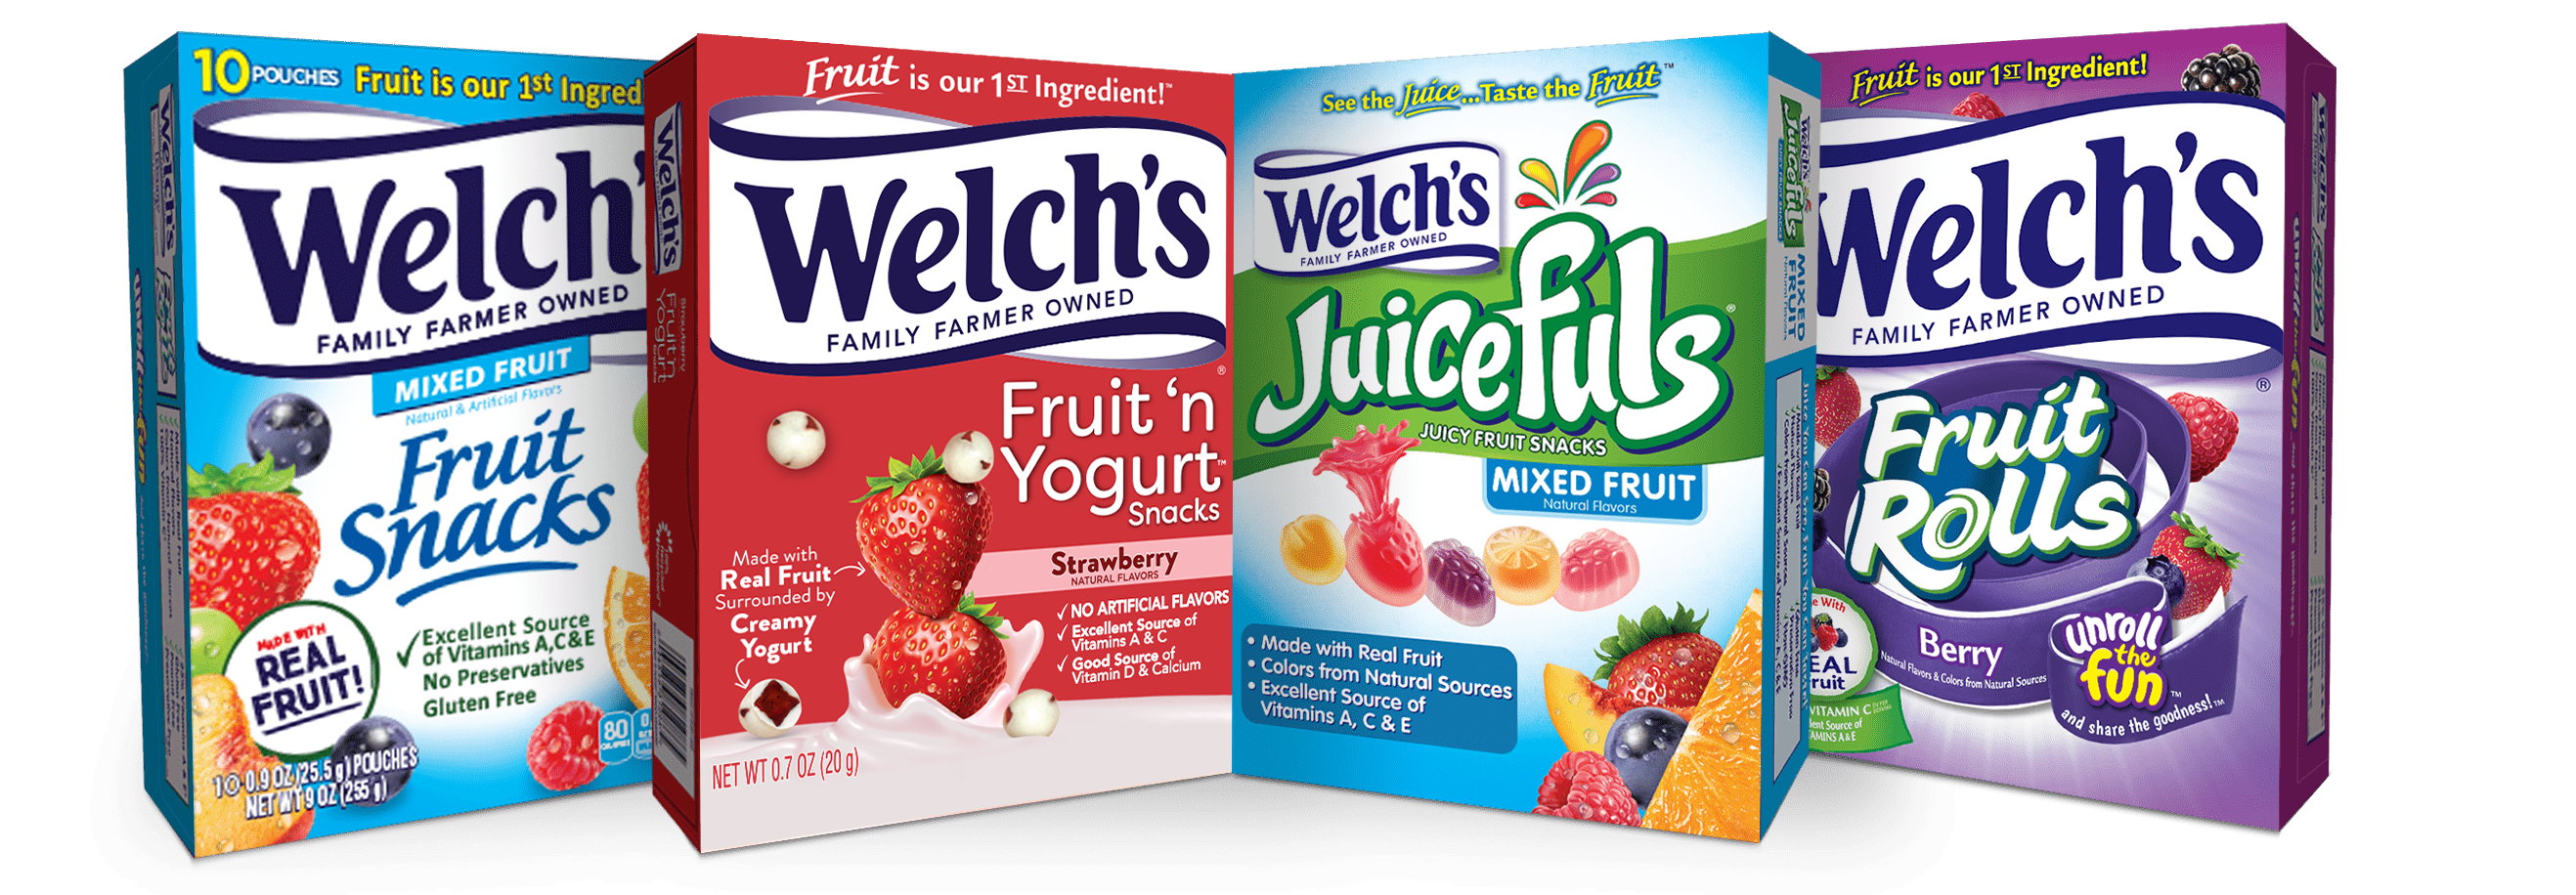 Welch’s® Fruit Snacks coupons